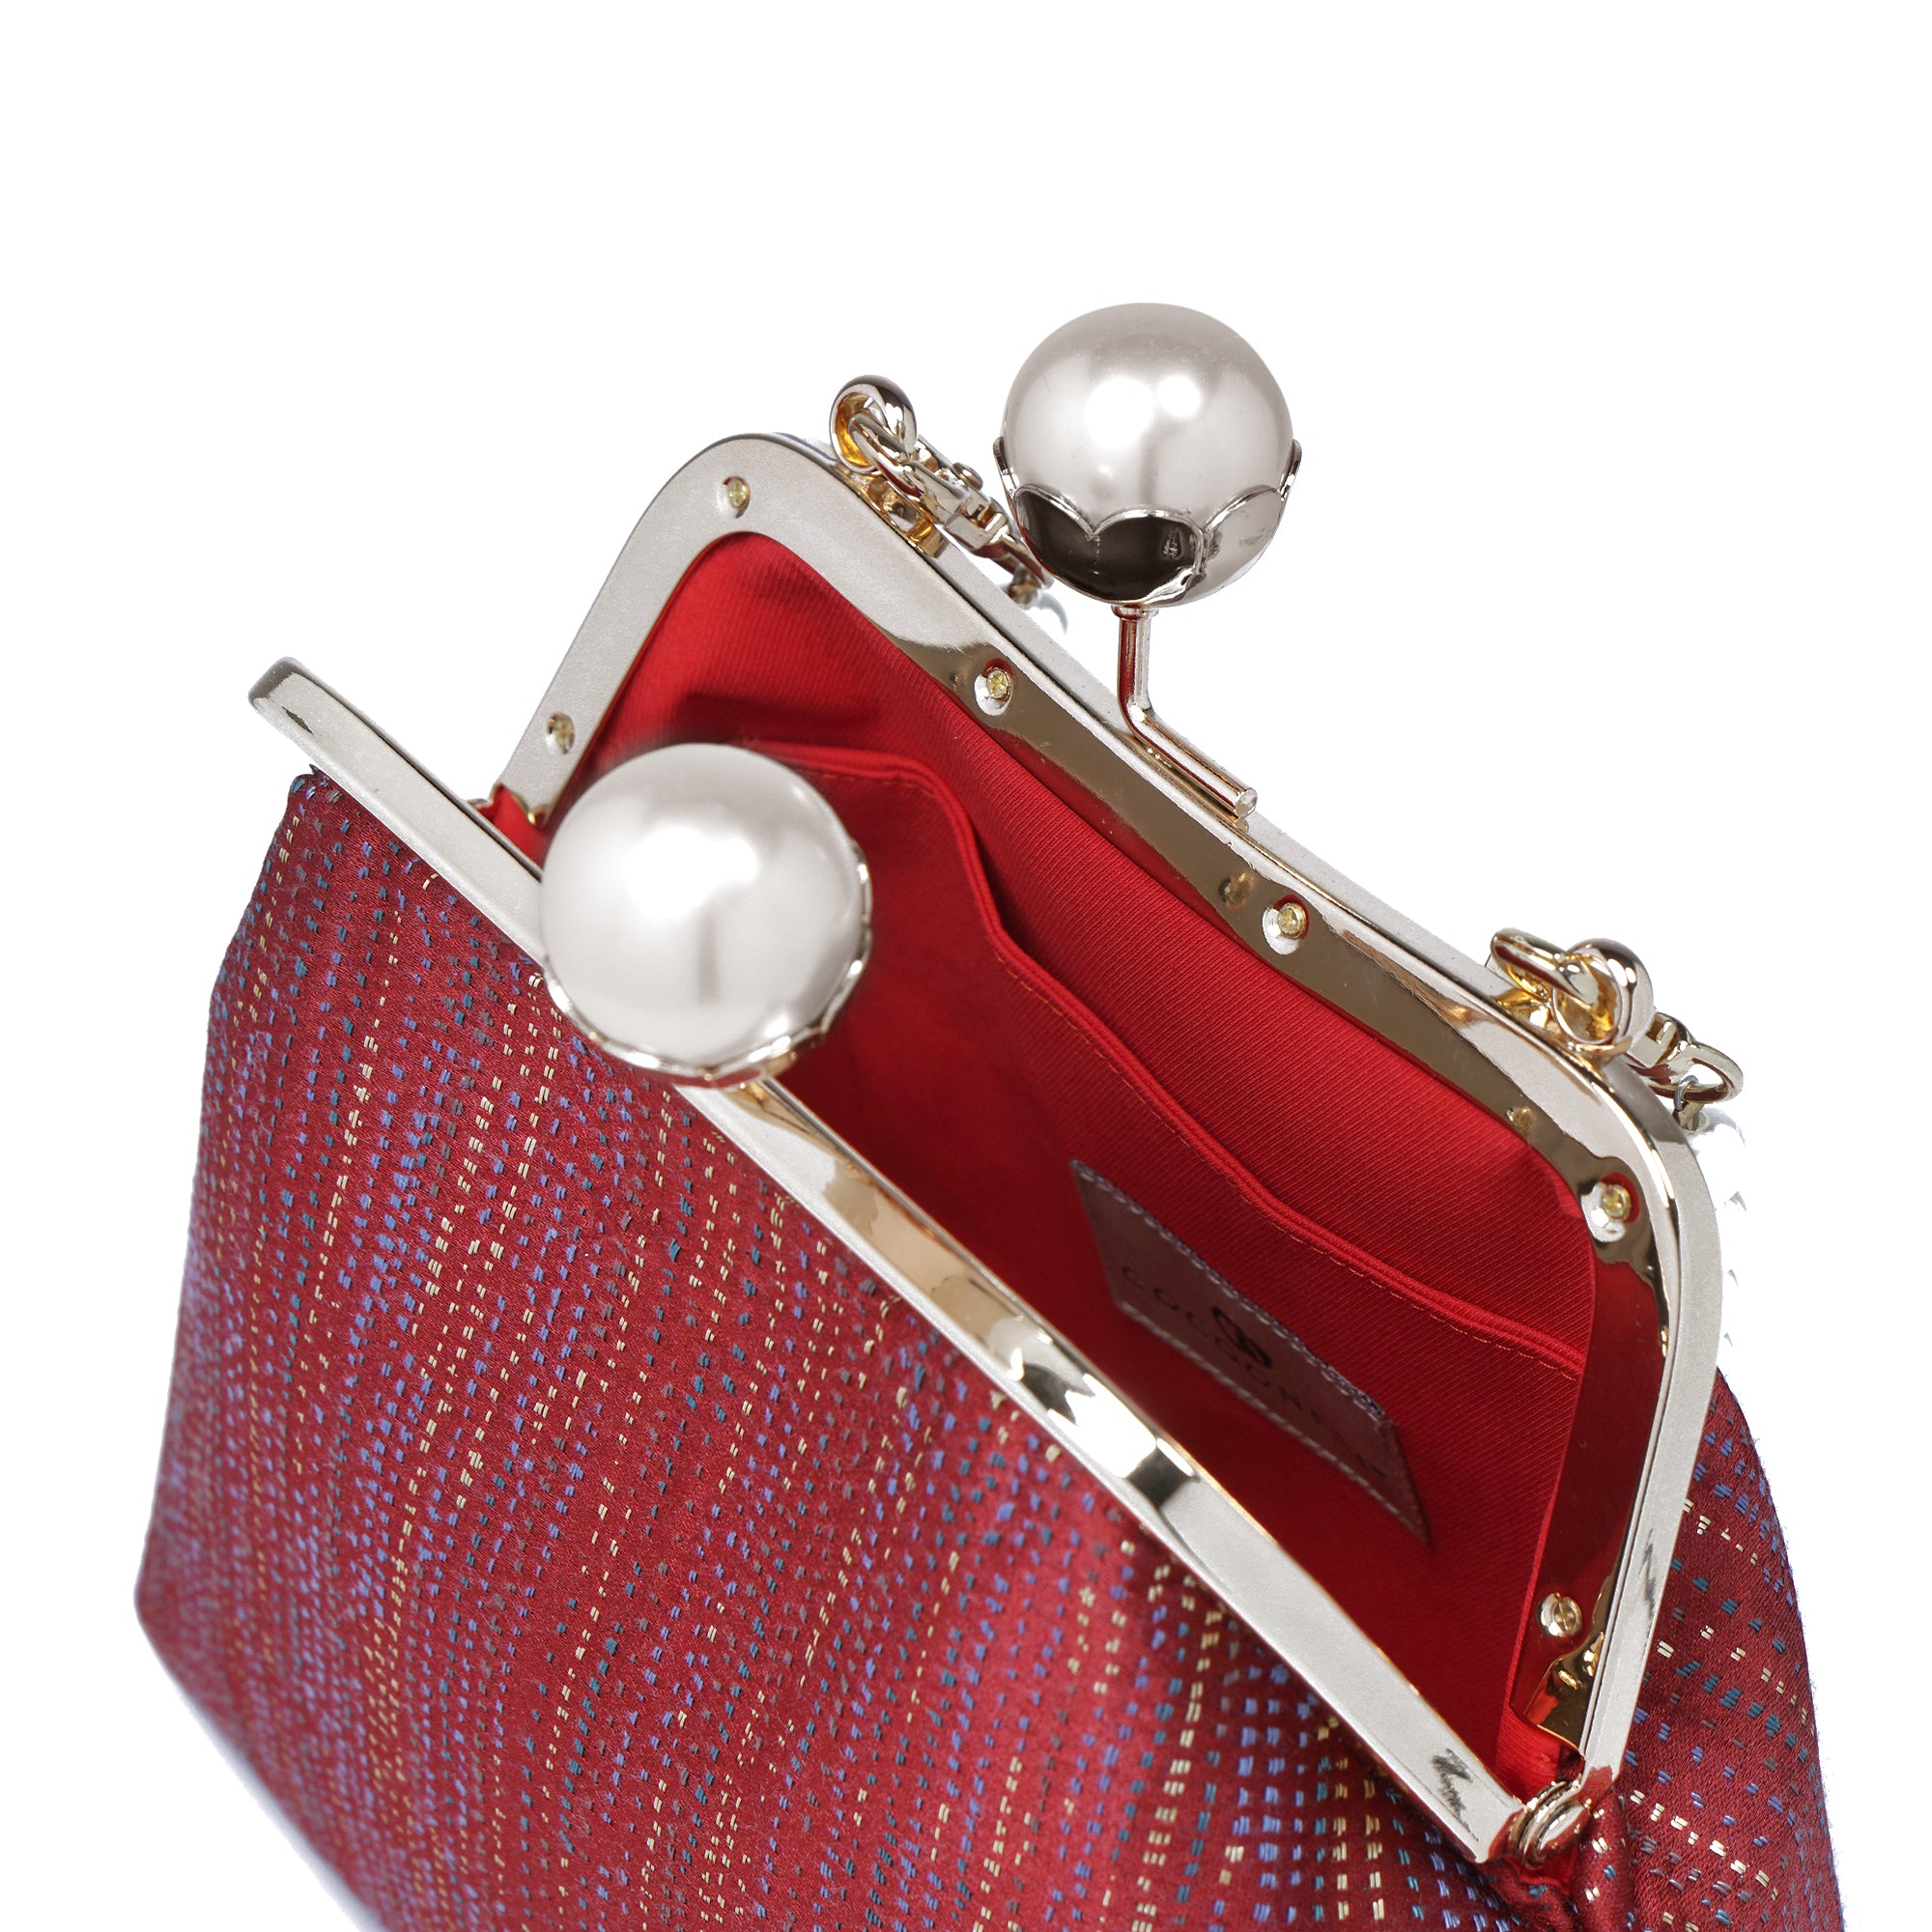 Floral Pearl Clasp Bag - Twinkle Star